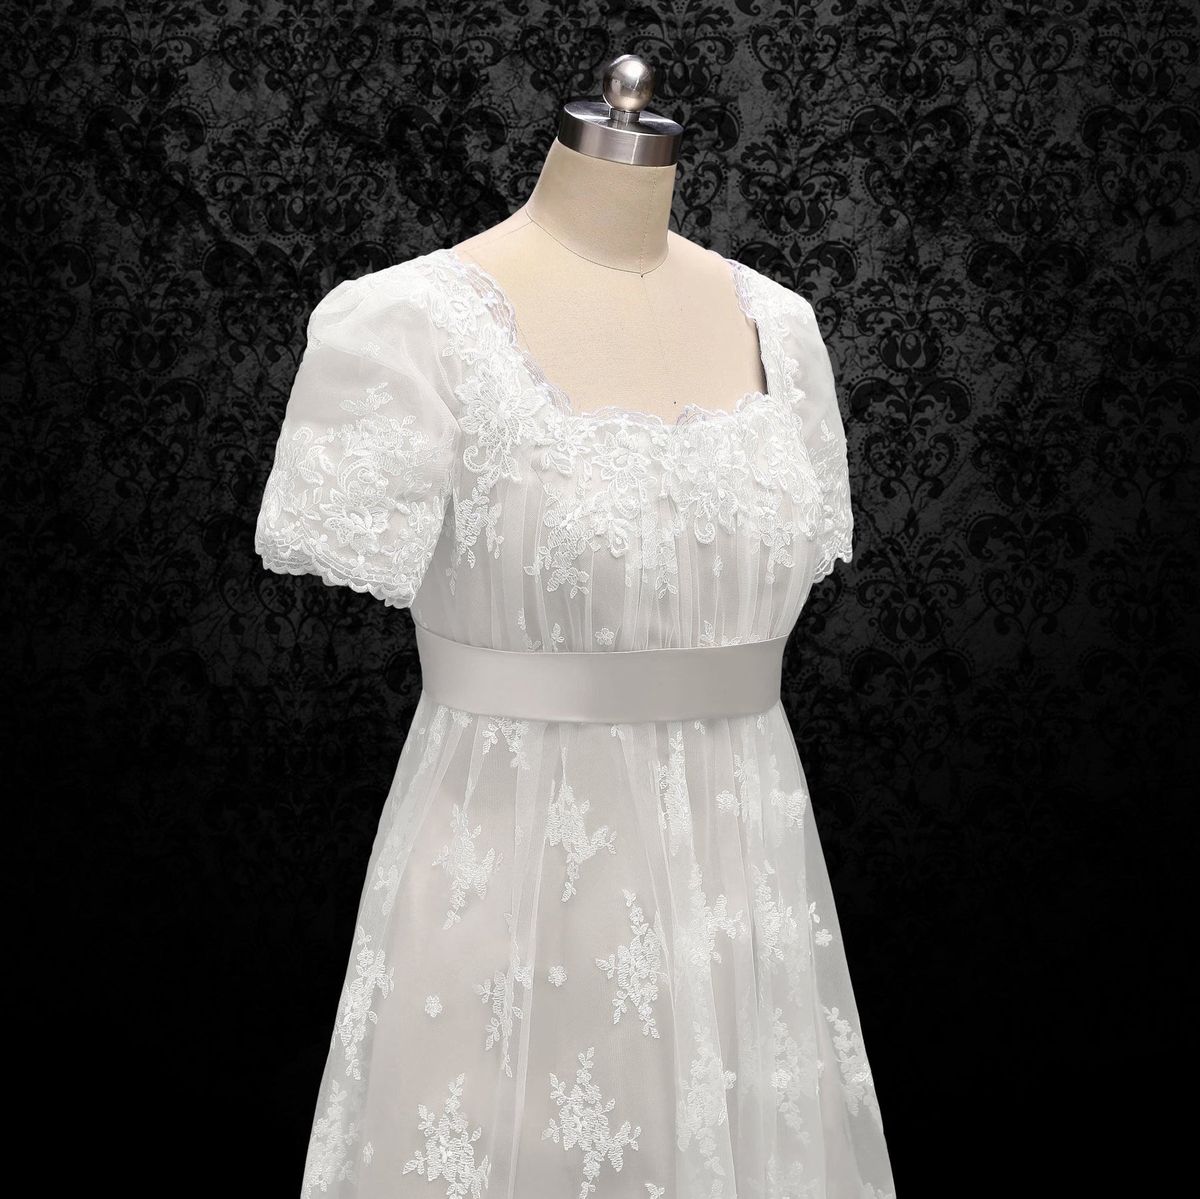 Wonderland By Lilian Plus Size 26 Prom Lace White A-line Dress on Queenly